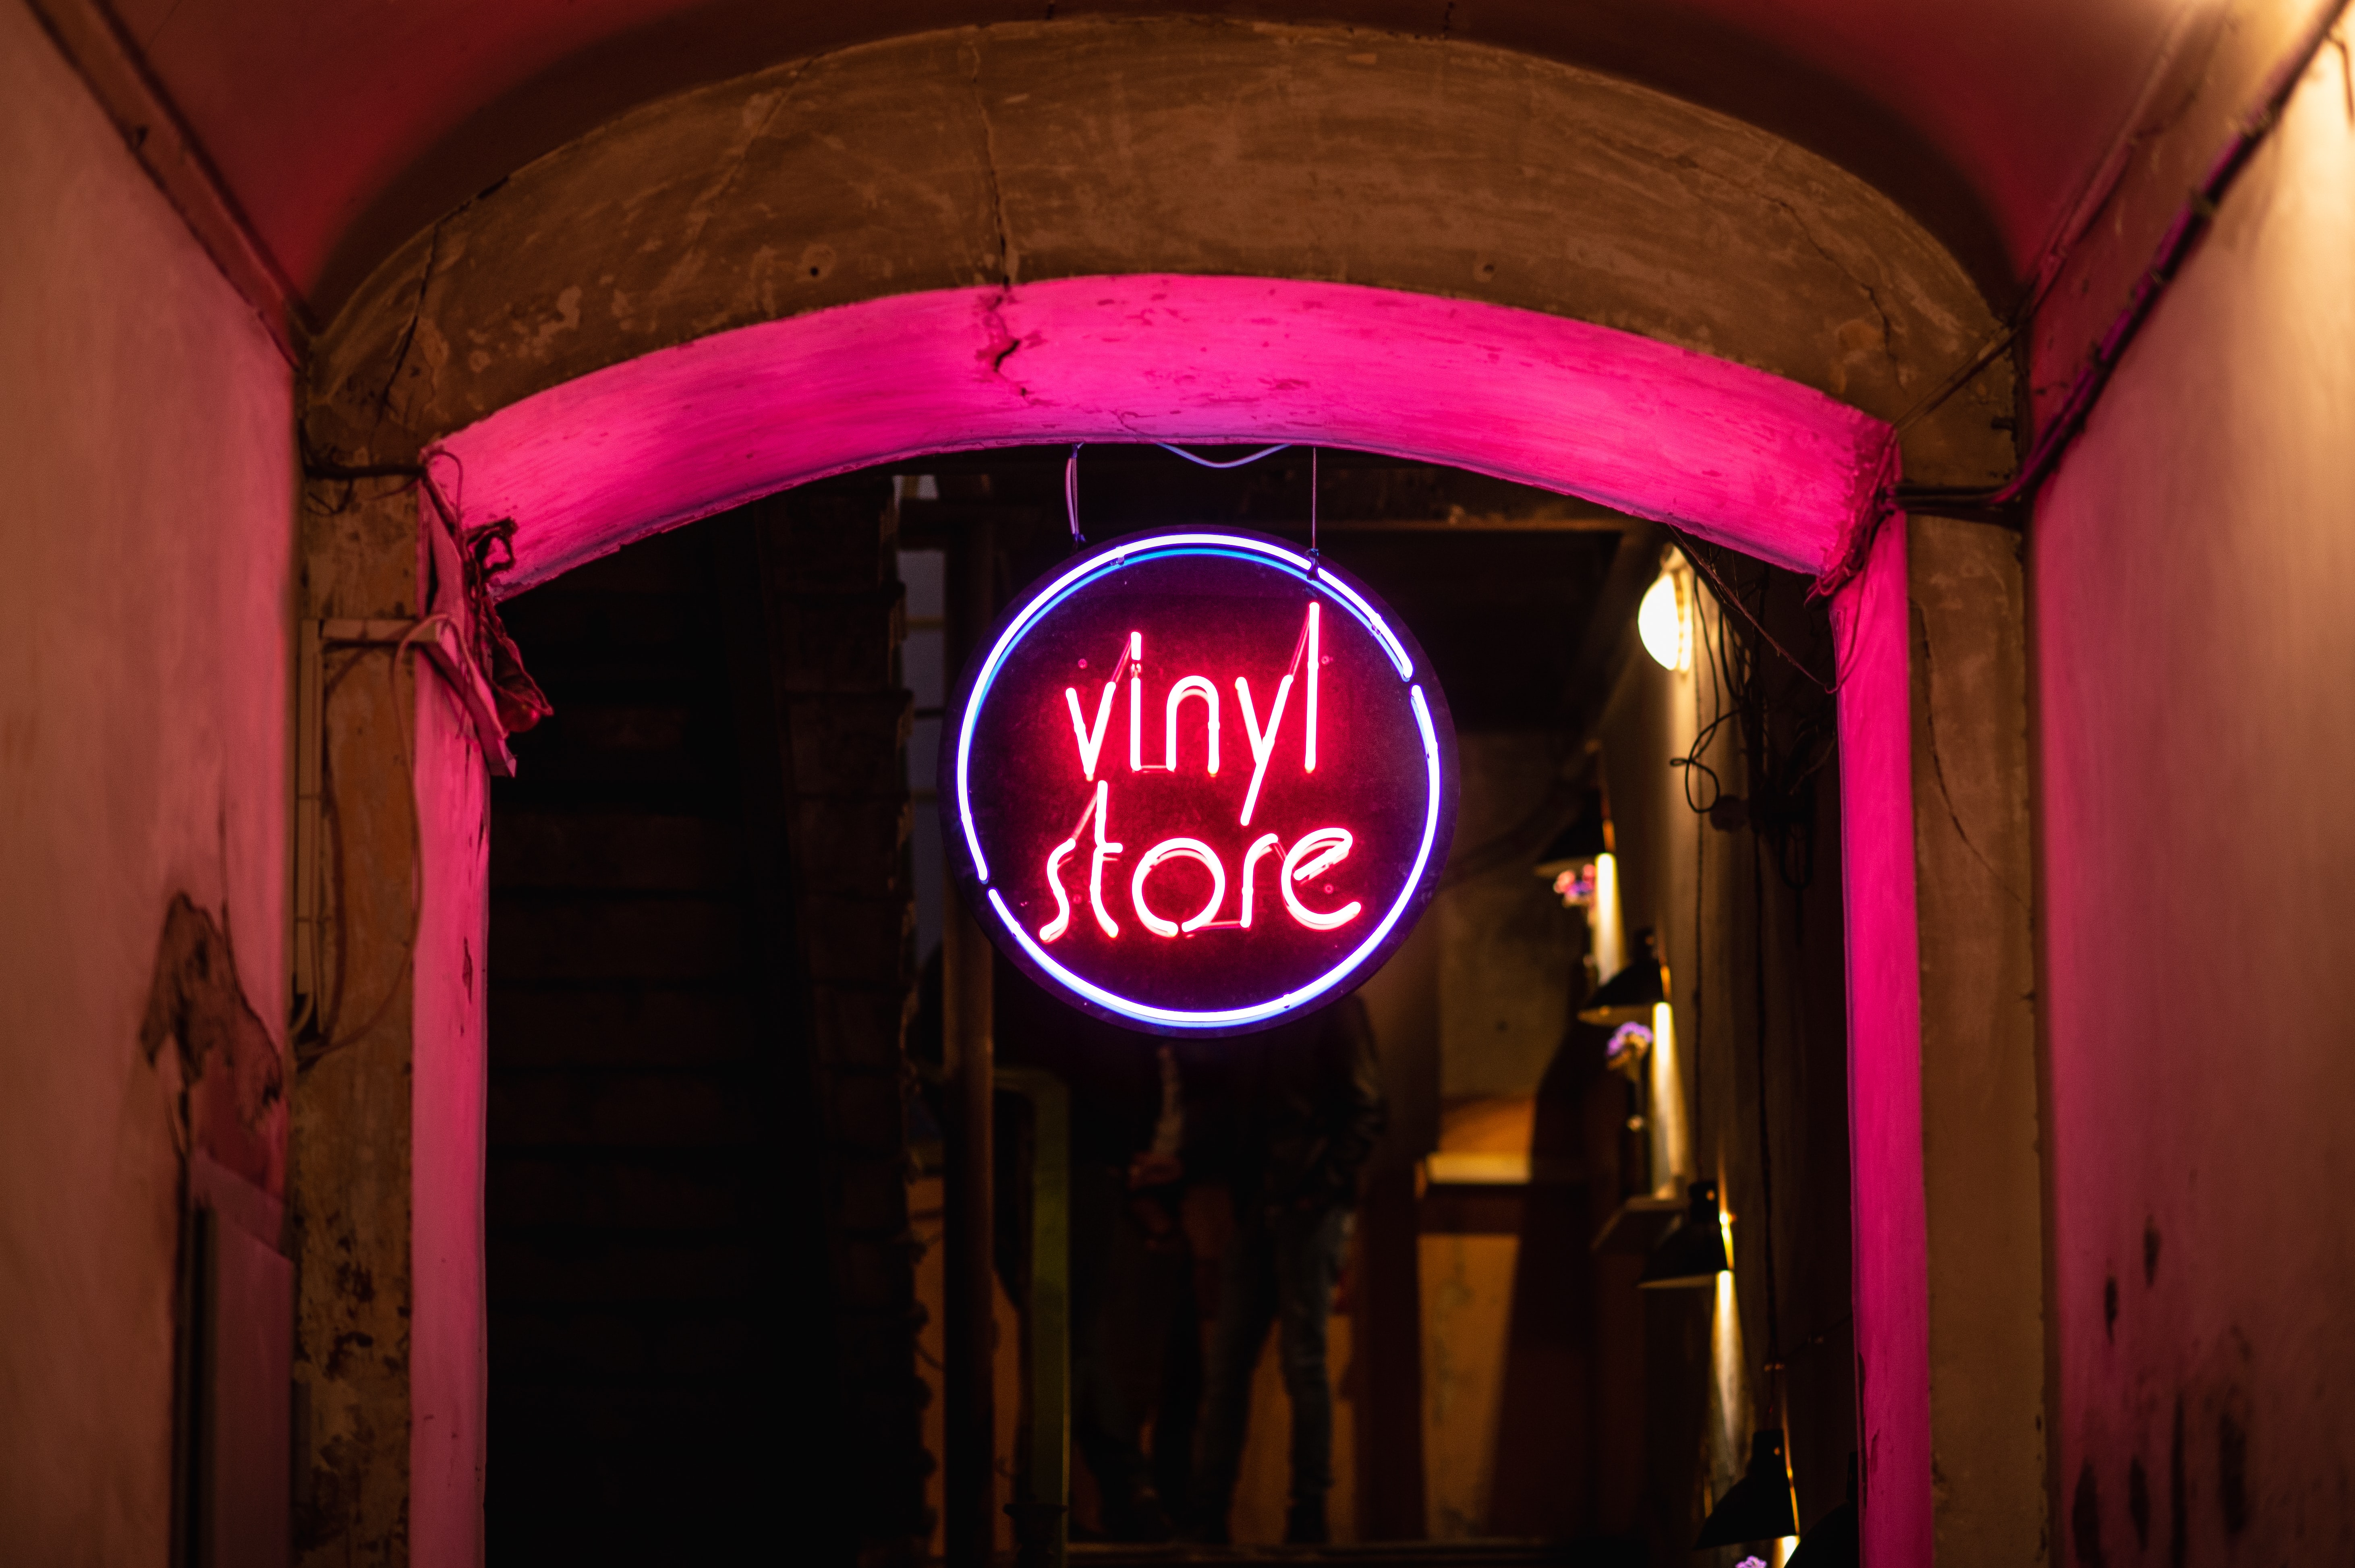 vynil store neon